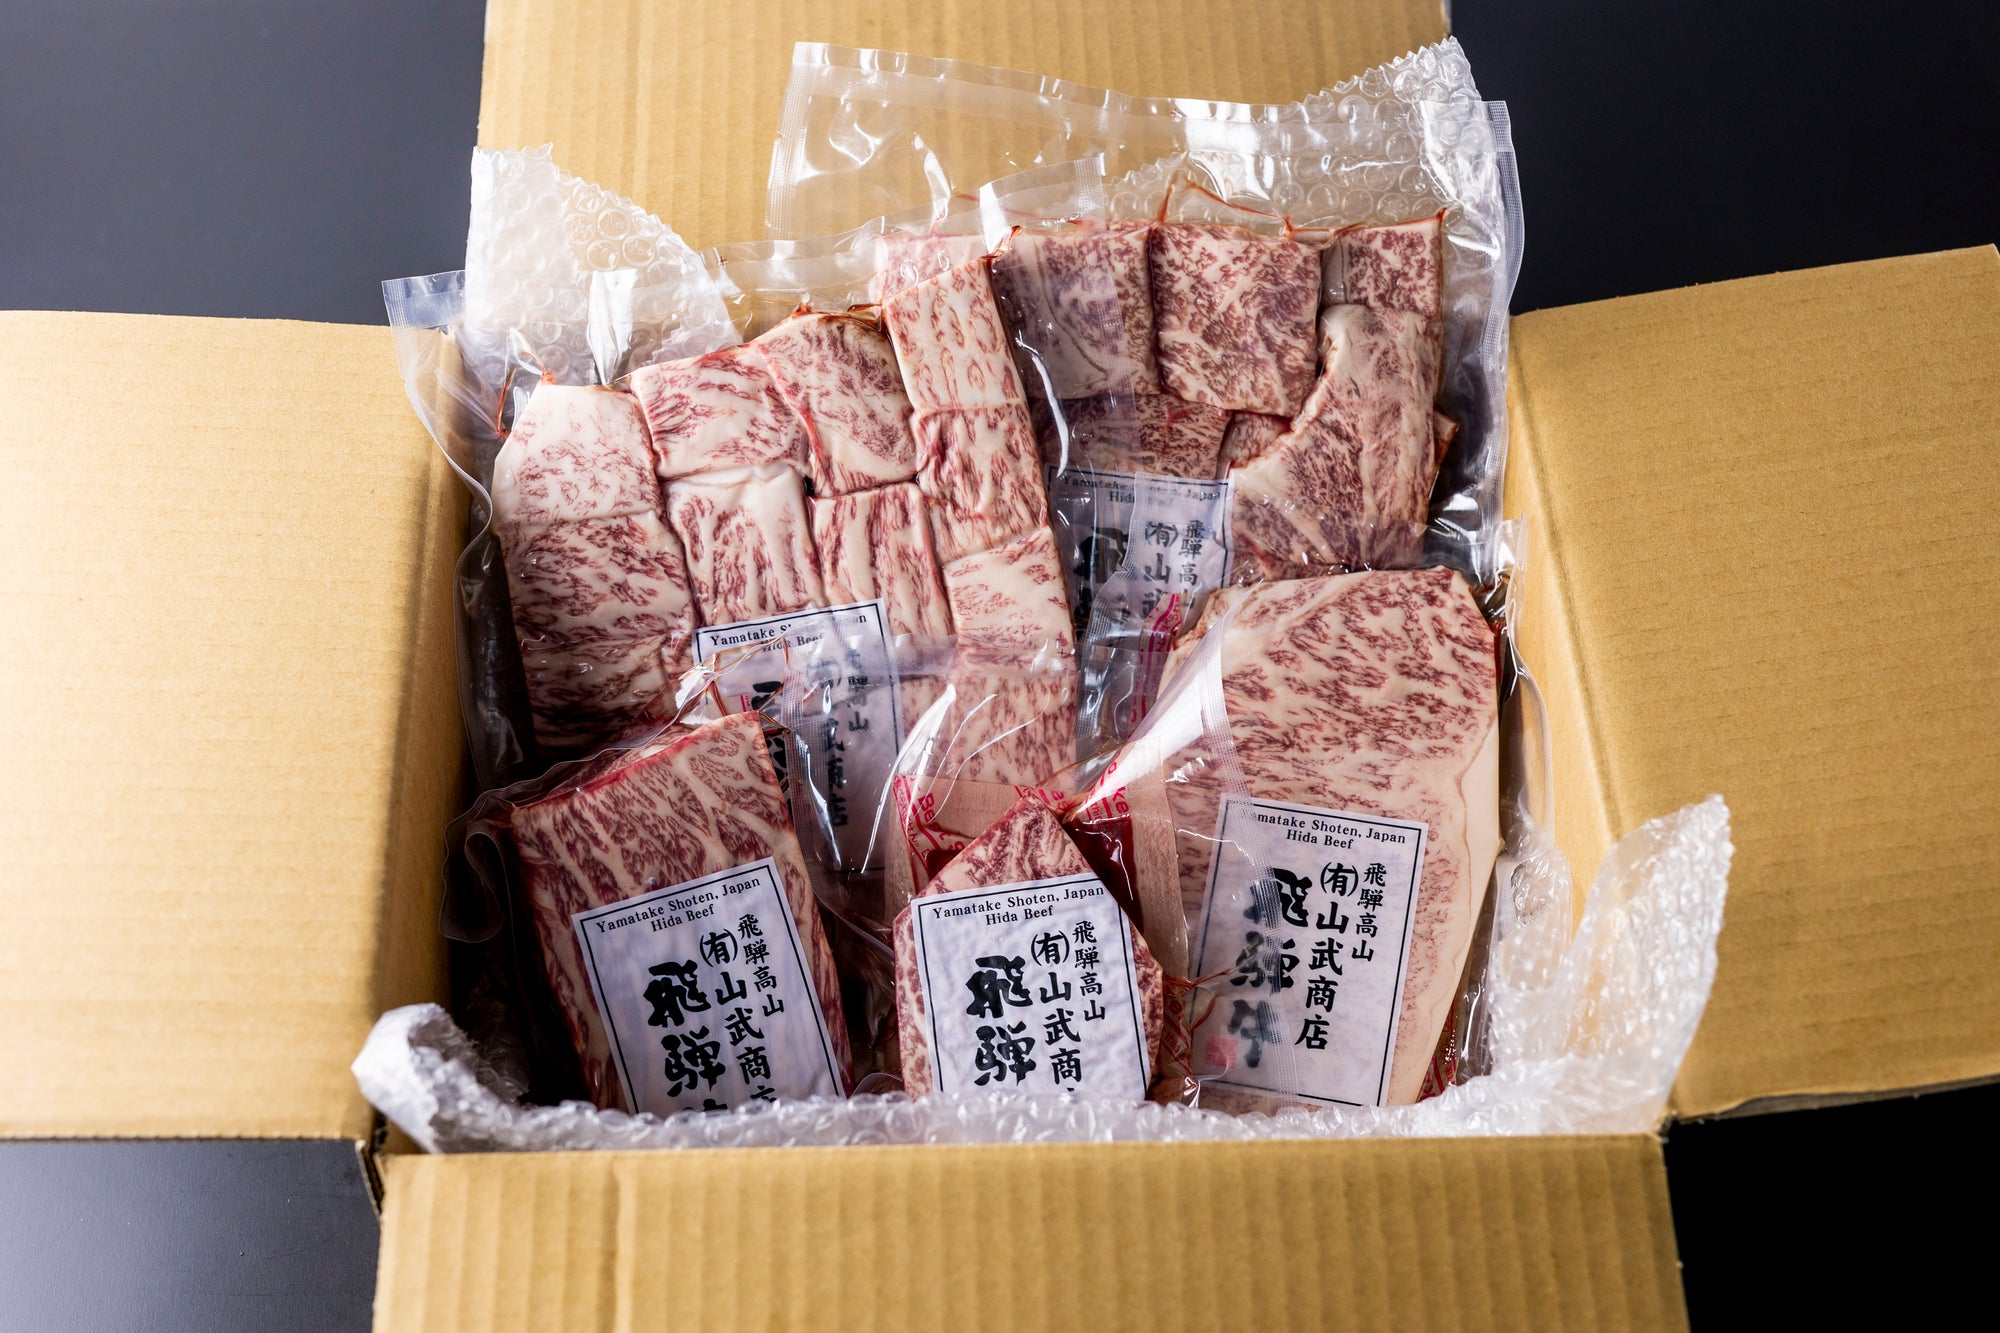 A Must-Have Souvenir from Japan to Delight in Singapore: Wagyu Beef, Now Easily Brought Onboard with Our New Service!